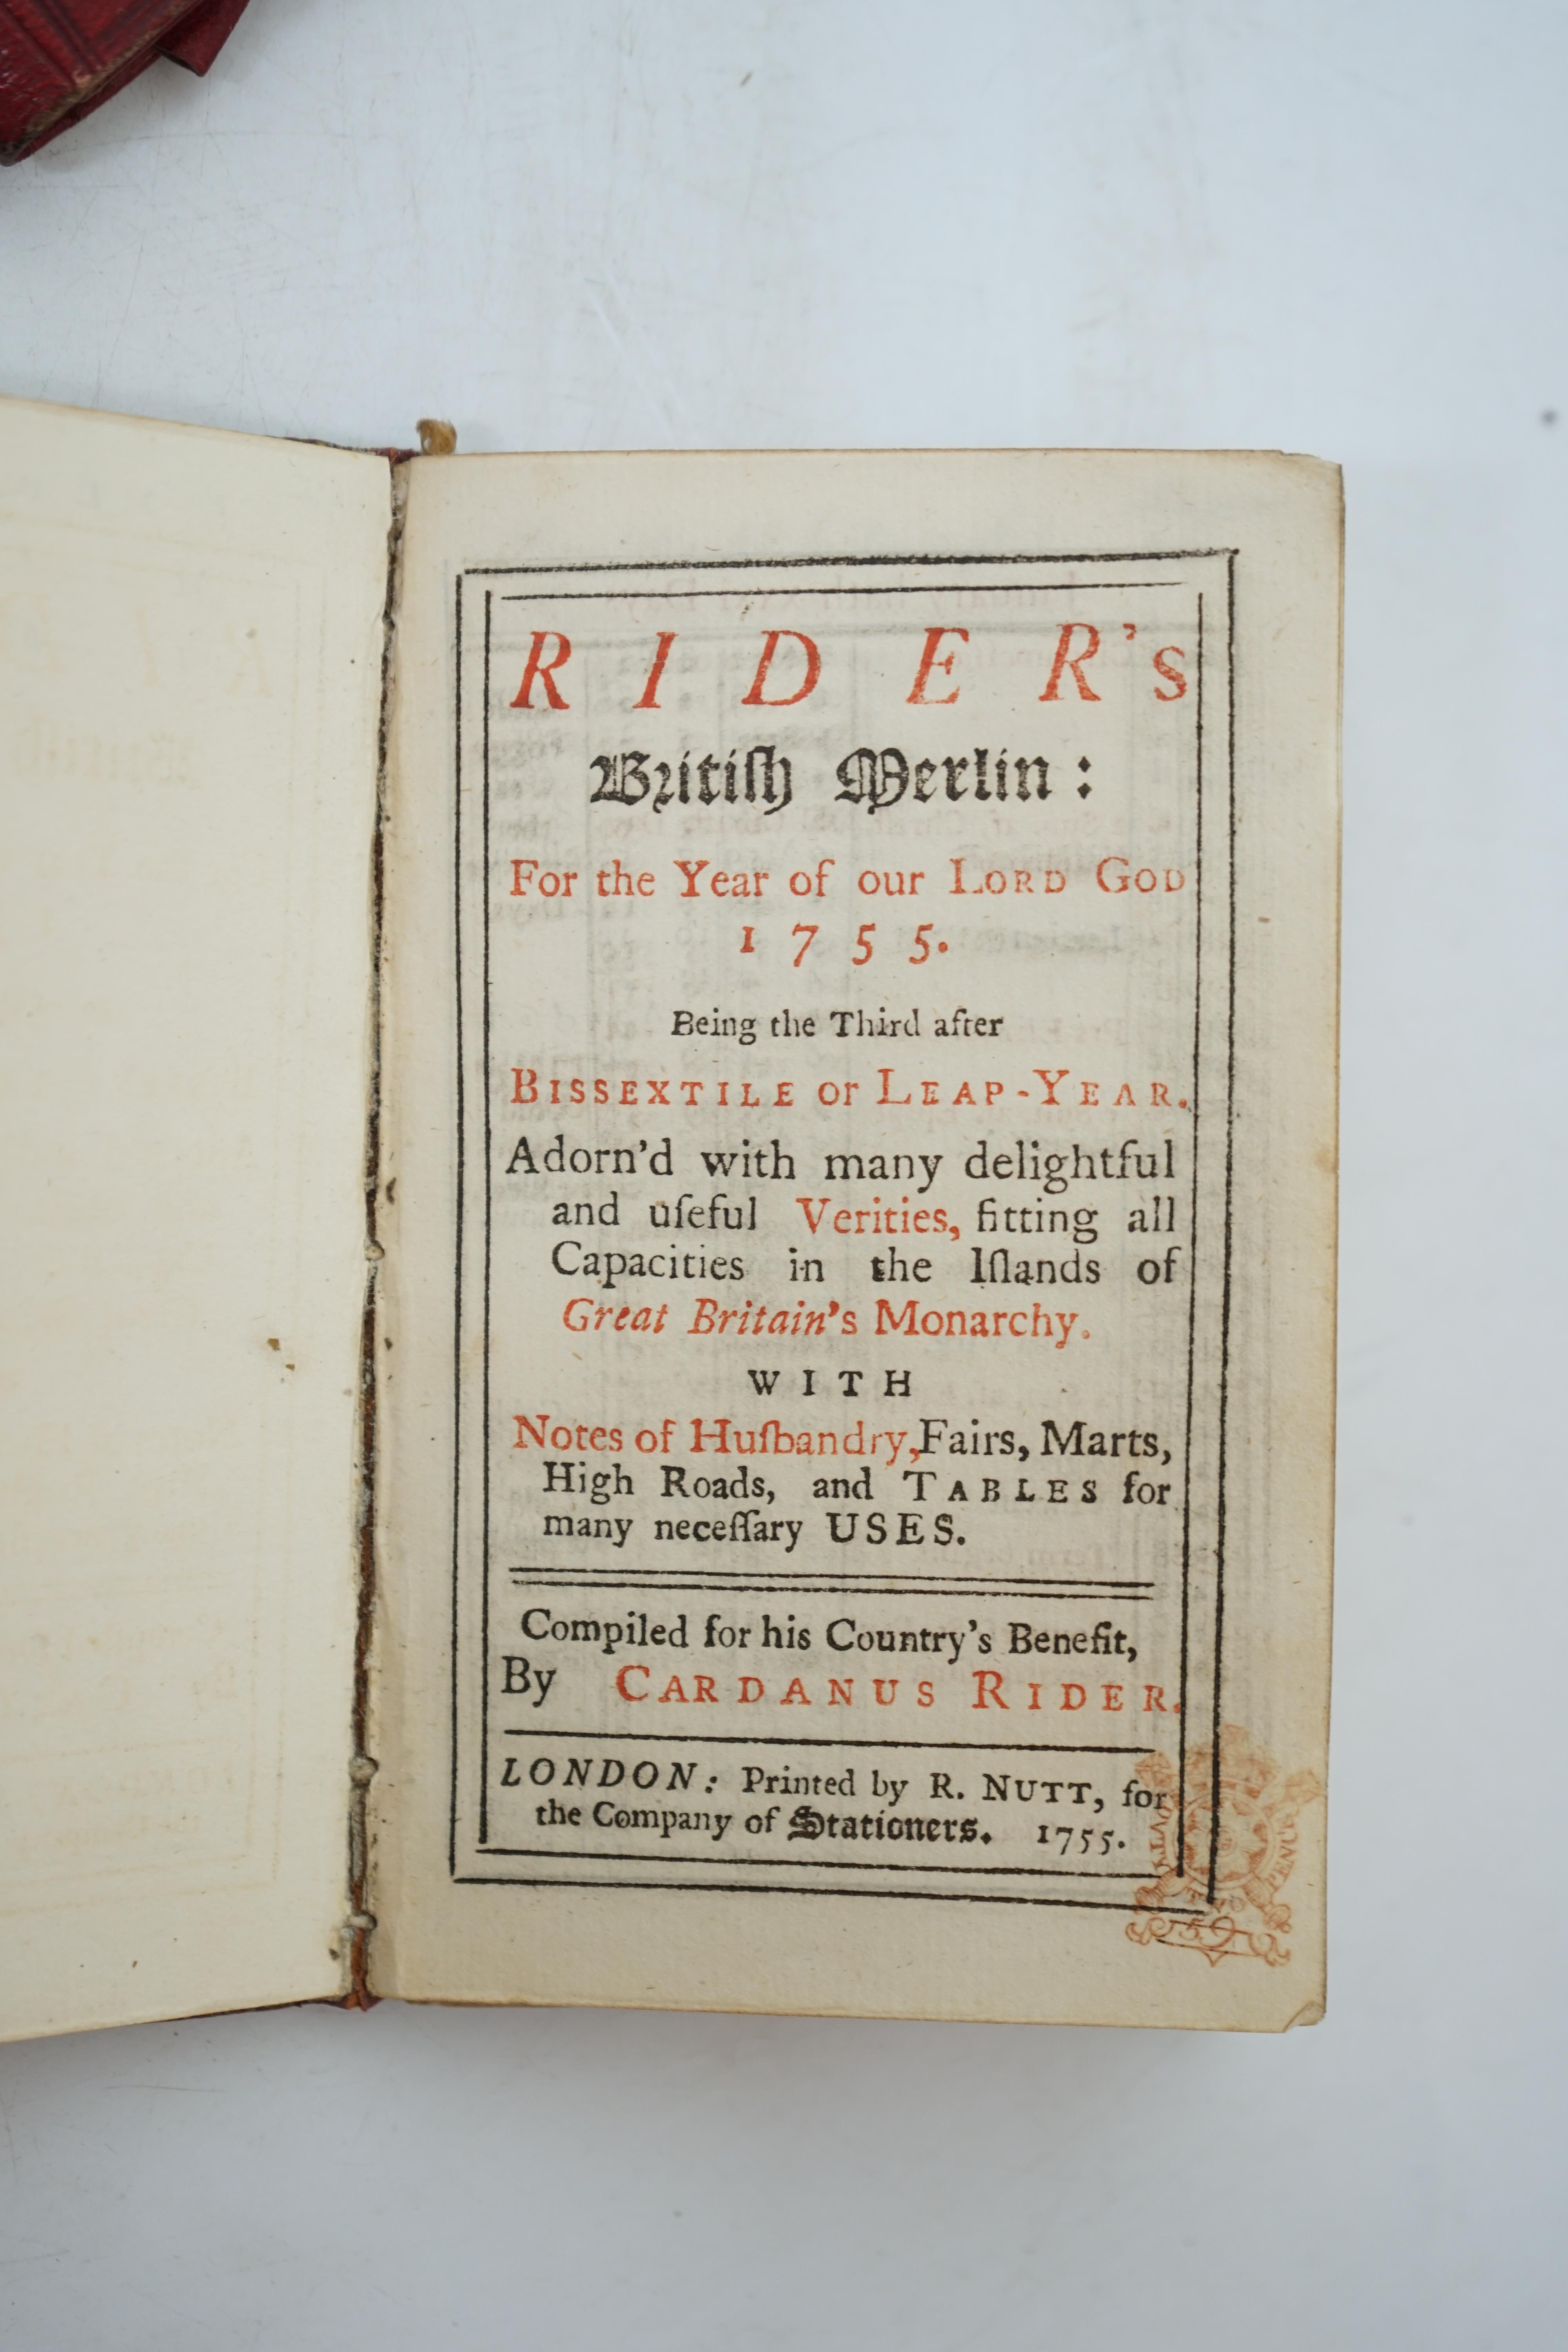 Rider, Cardanus [Richard Saunders] - Rider’s British Merlin: For the Year of our Lord God 1755, 72 unpaginated pages, 12mo, gilt tooled red morocco with floral engraved silver bosses, two each cover, together with a mid